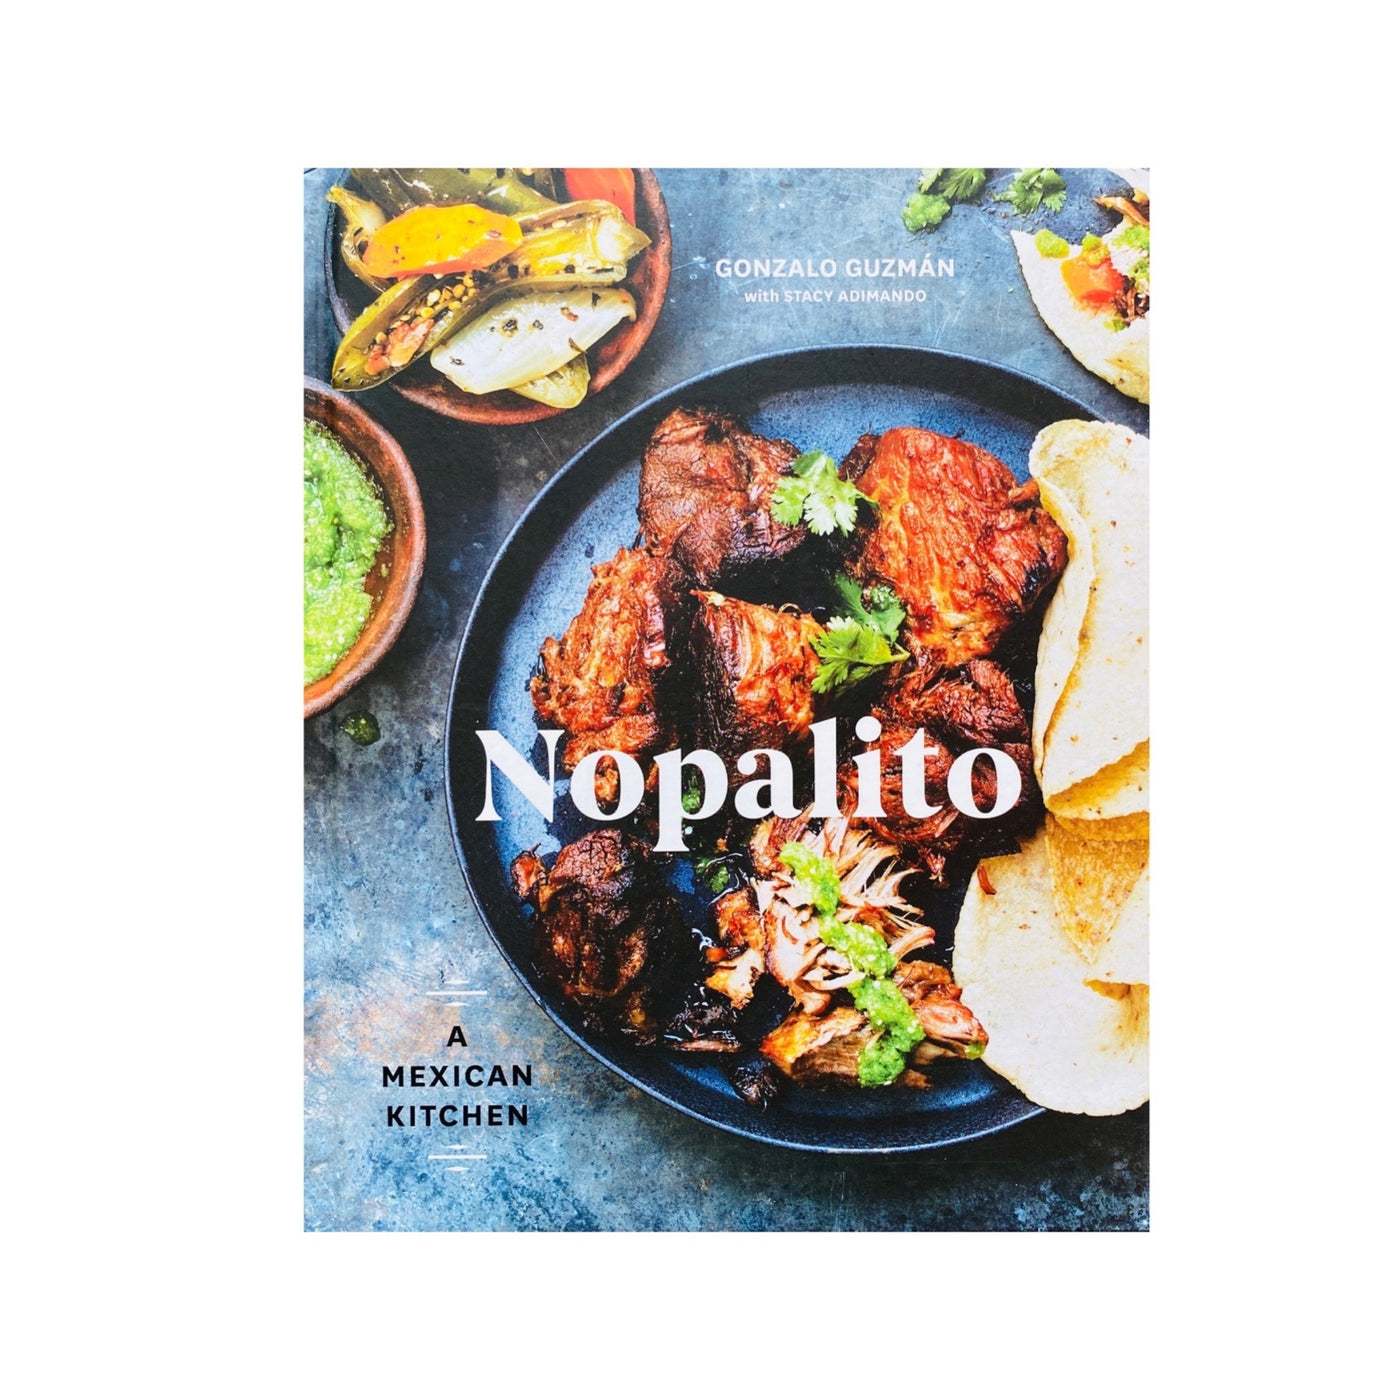 Front cover of Nopalito: A Mexican Kitchen cookbook. Image shows plate of cooked meat with cilantro and tortillas. Additional image includes bowl of roasted chiles and green salsa.